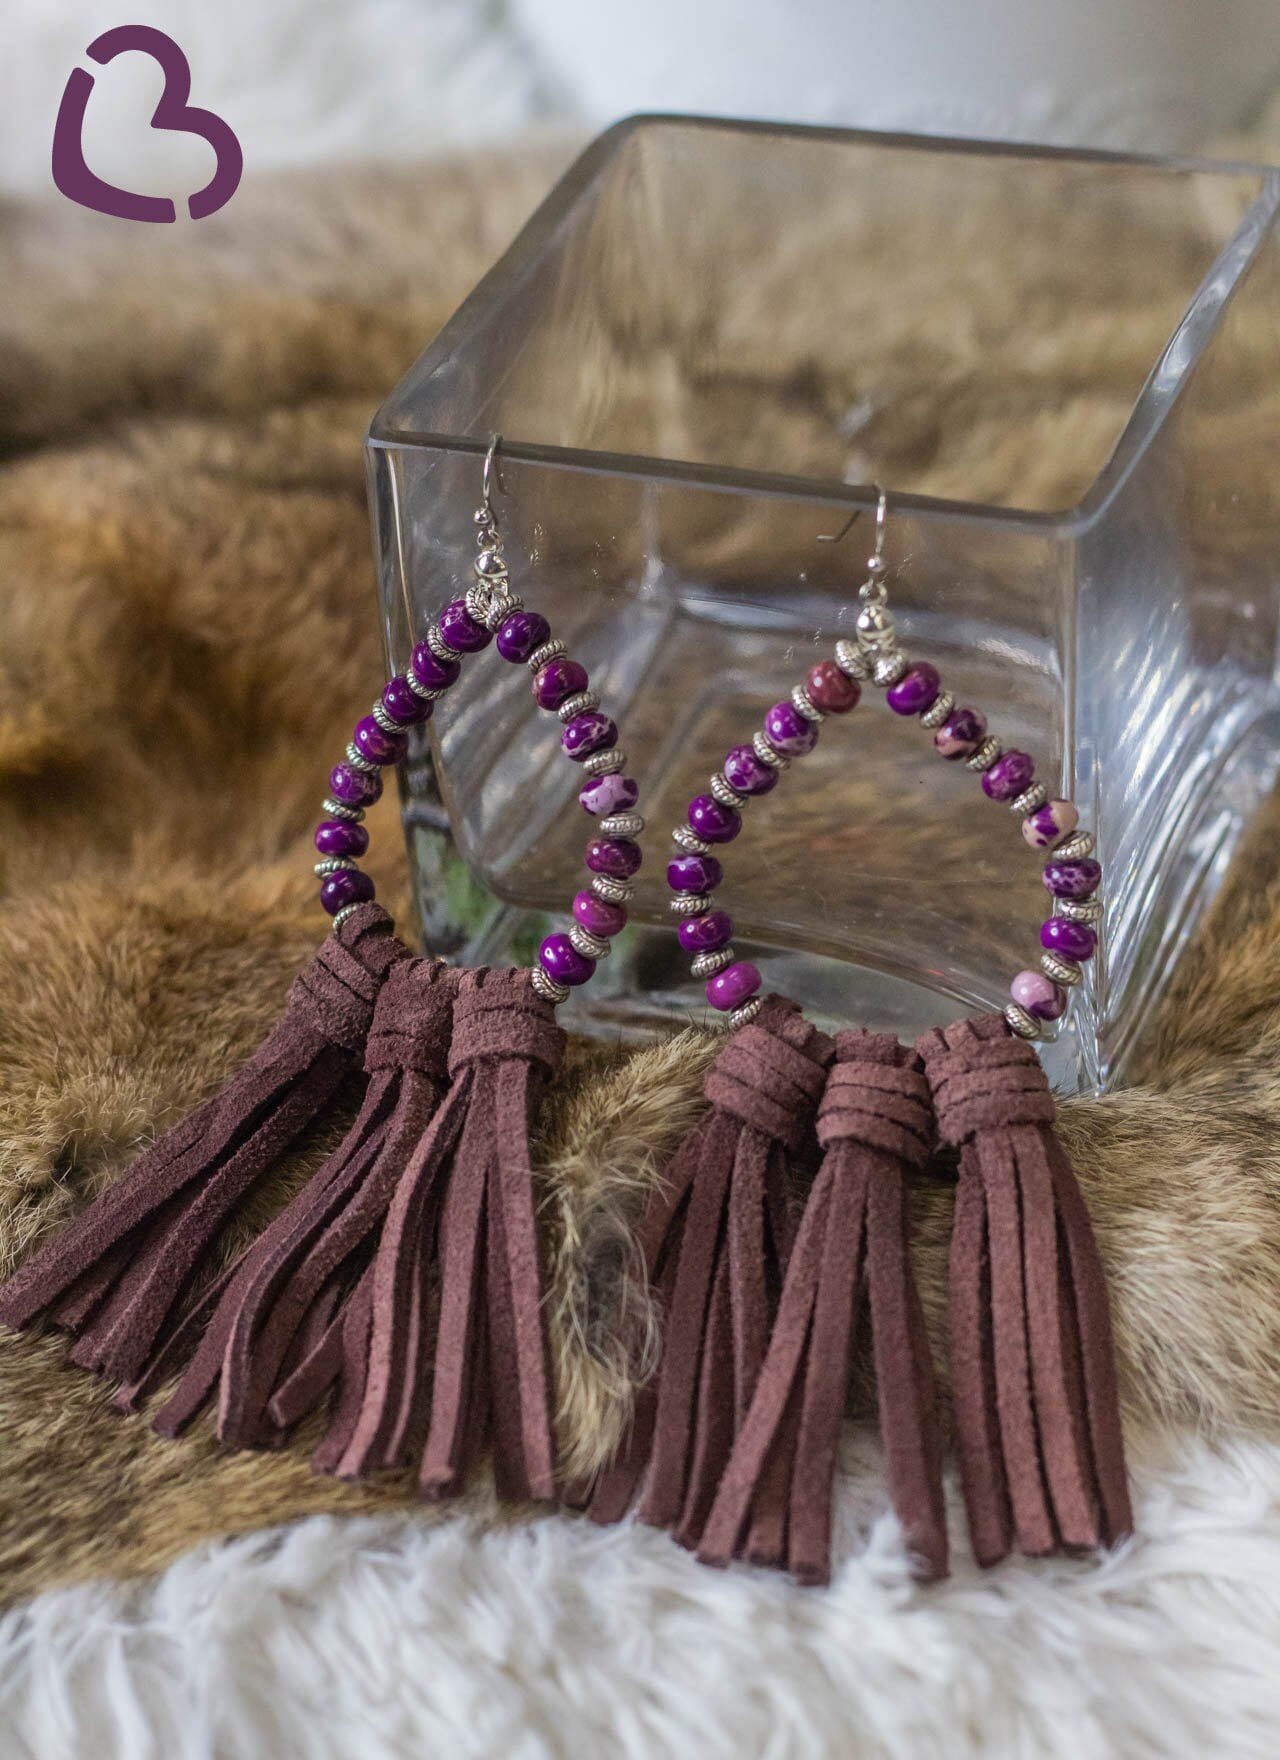 Willa Leather Tassel Earrings with Purple Agate Stone Beads and Brown Tassels Jewelry 18 